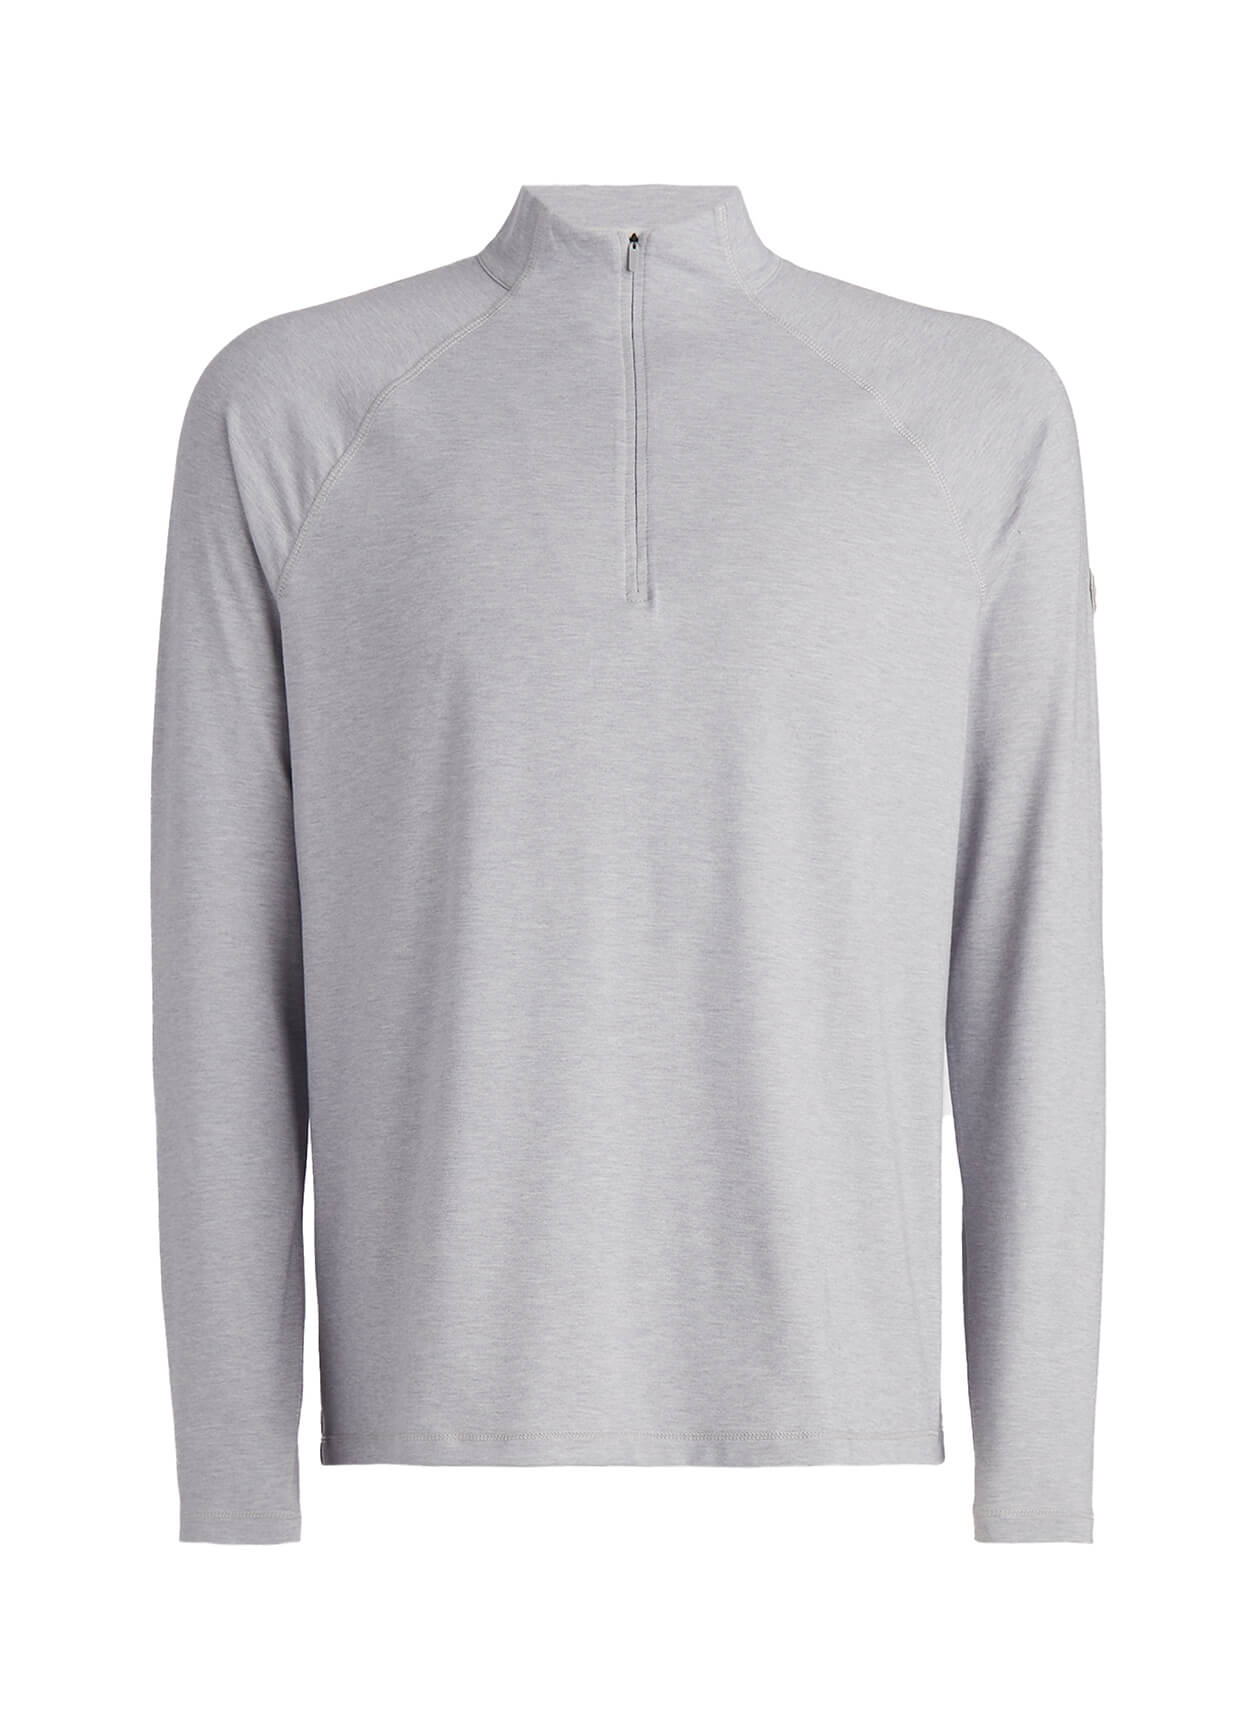 G/FORE Light Heather Grey Luxe Quarter-Zip Mid Layer SS24 Men's